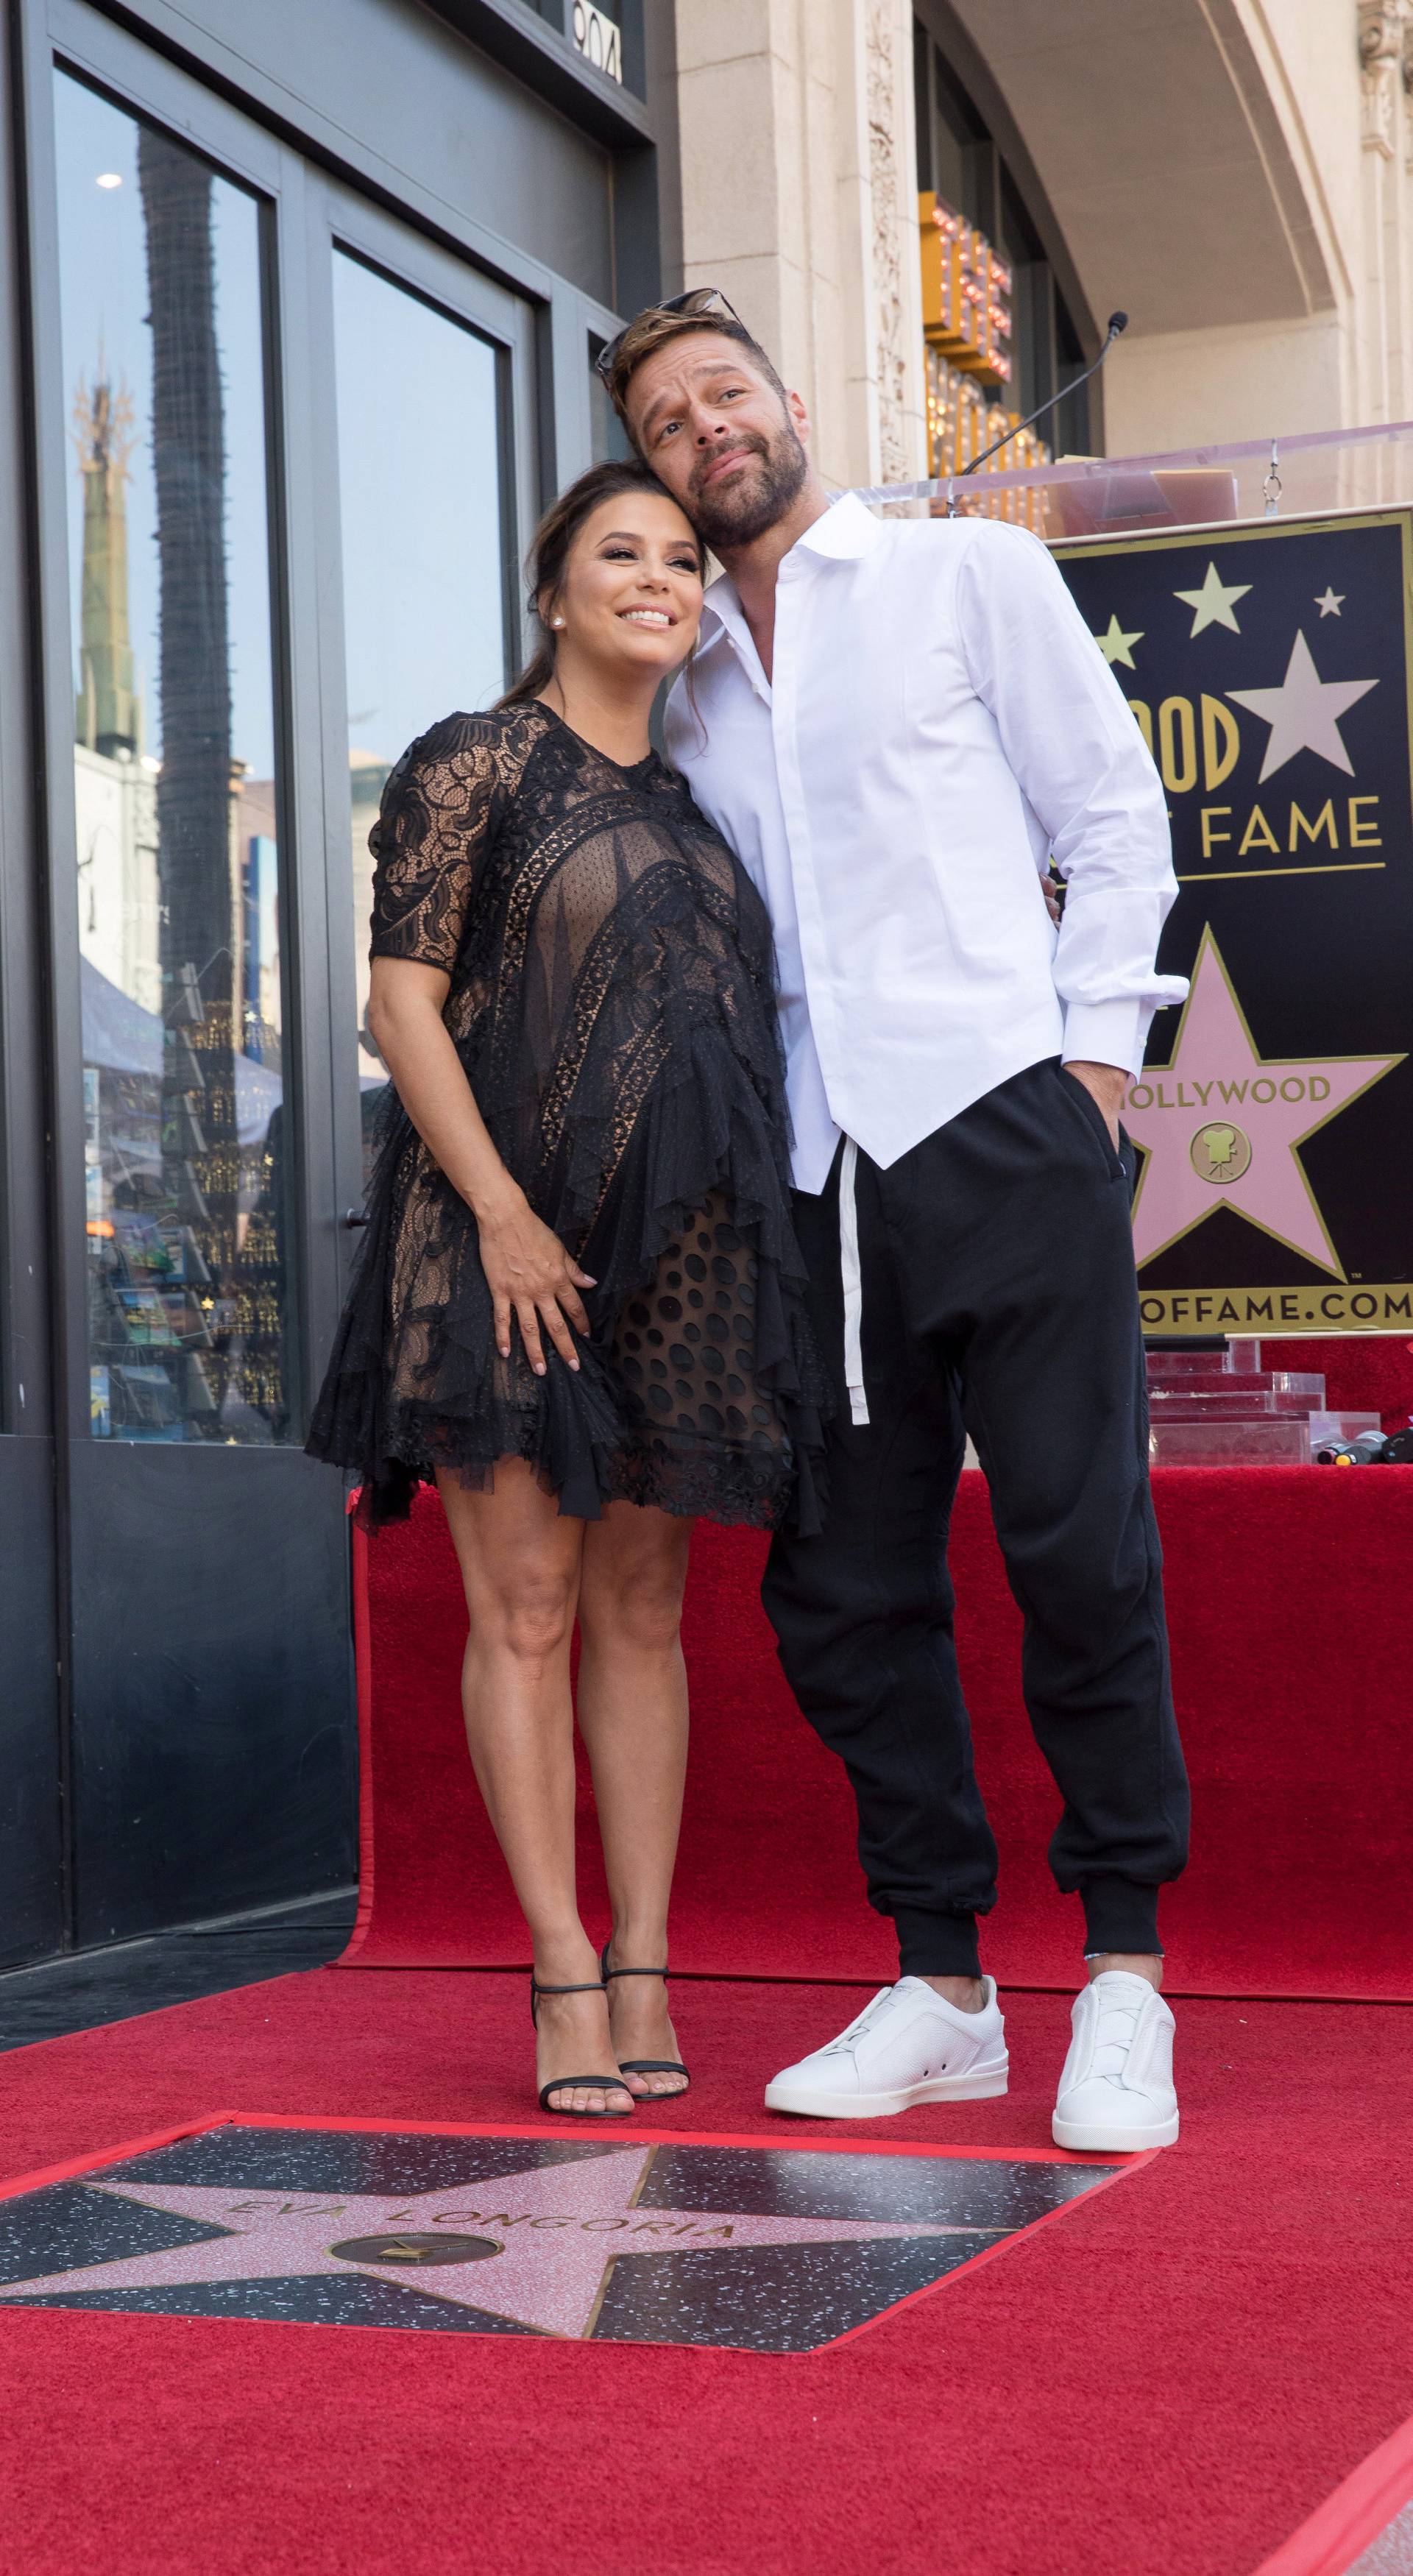 Eva Longoria and Ricky Martin pose on the Hollywood Walk of Fame in Los Angeles